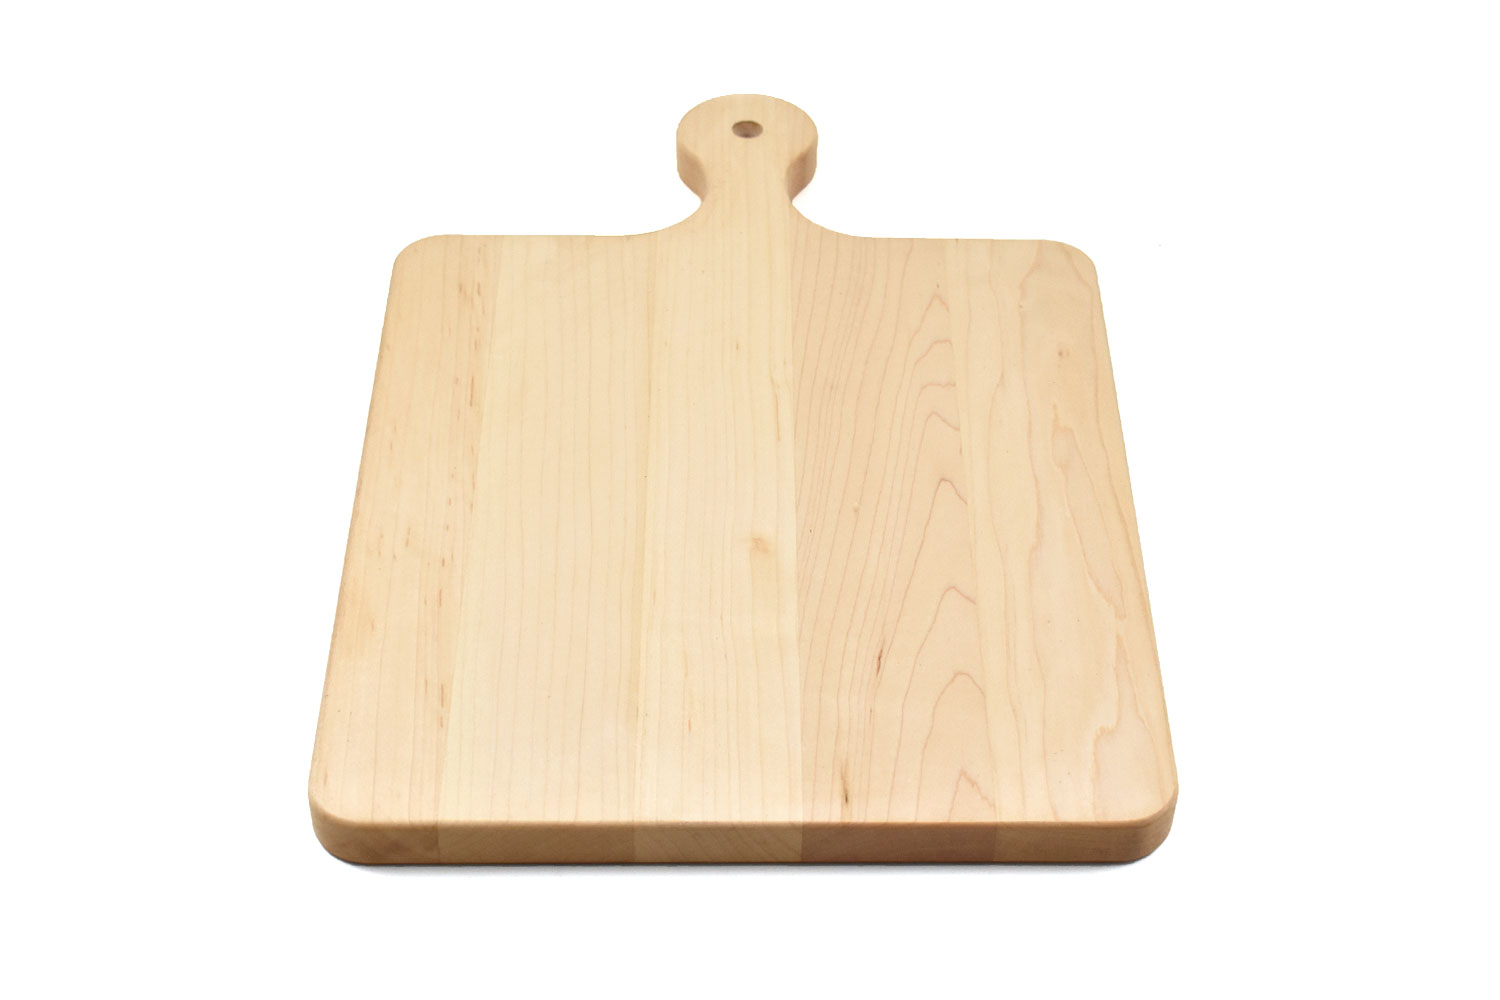 Maple Wood Cutting Board with Rounded Handle, Custom Engraved, Chopping Board, Presentation Board, Made in Canada